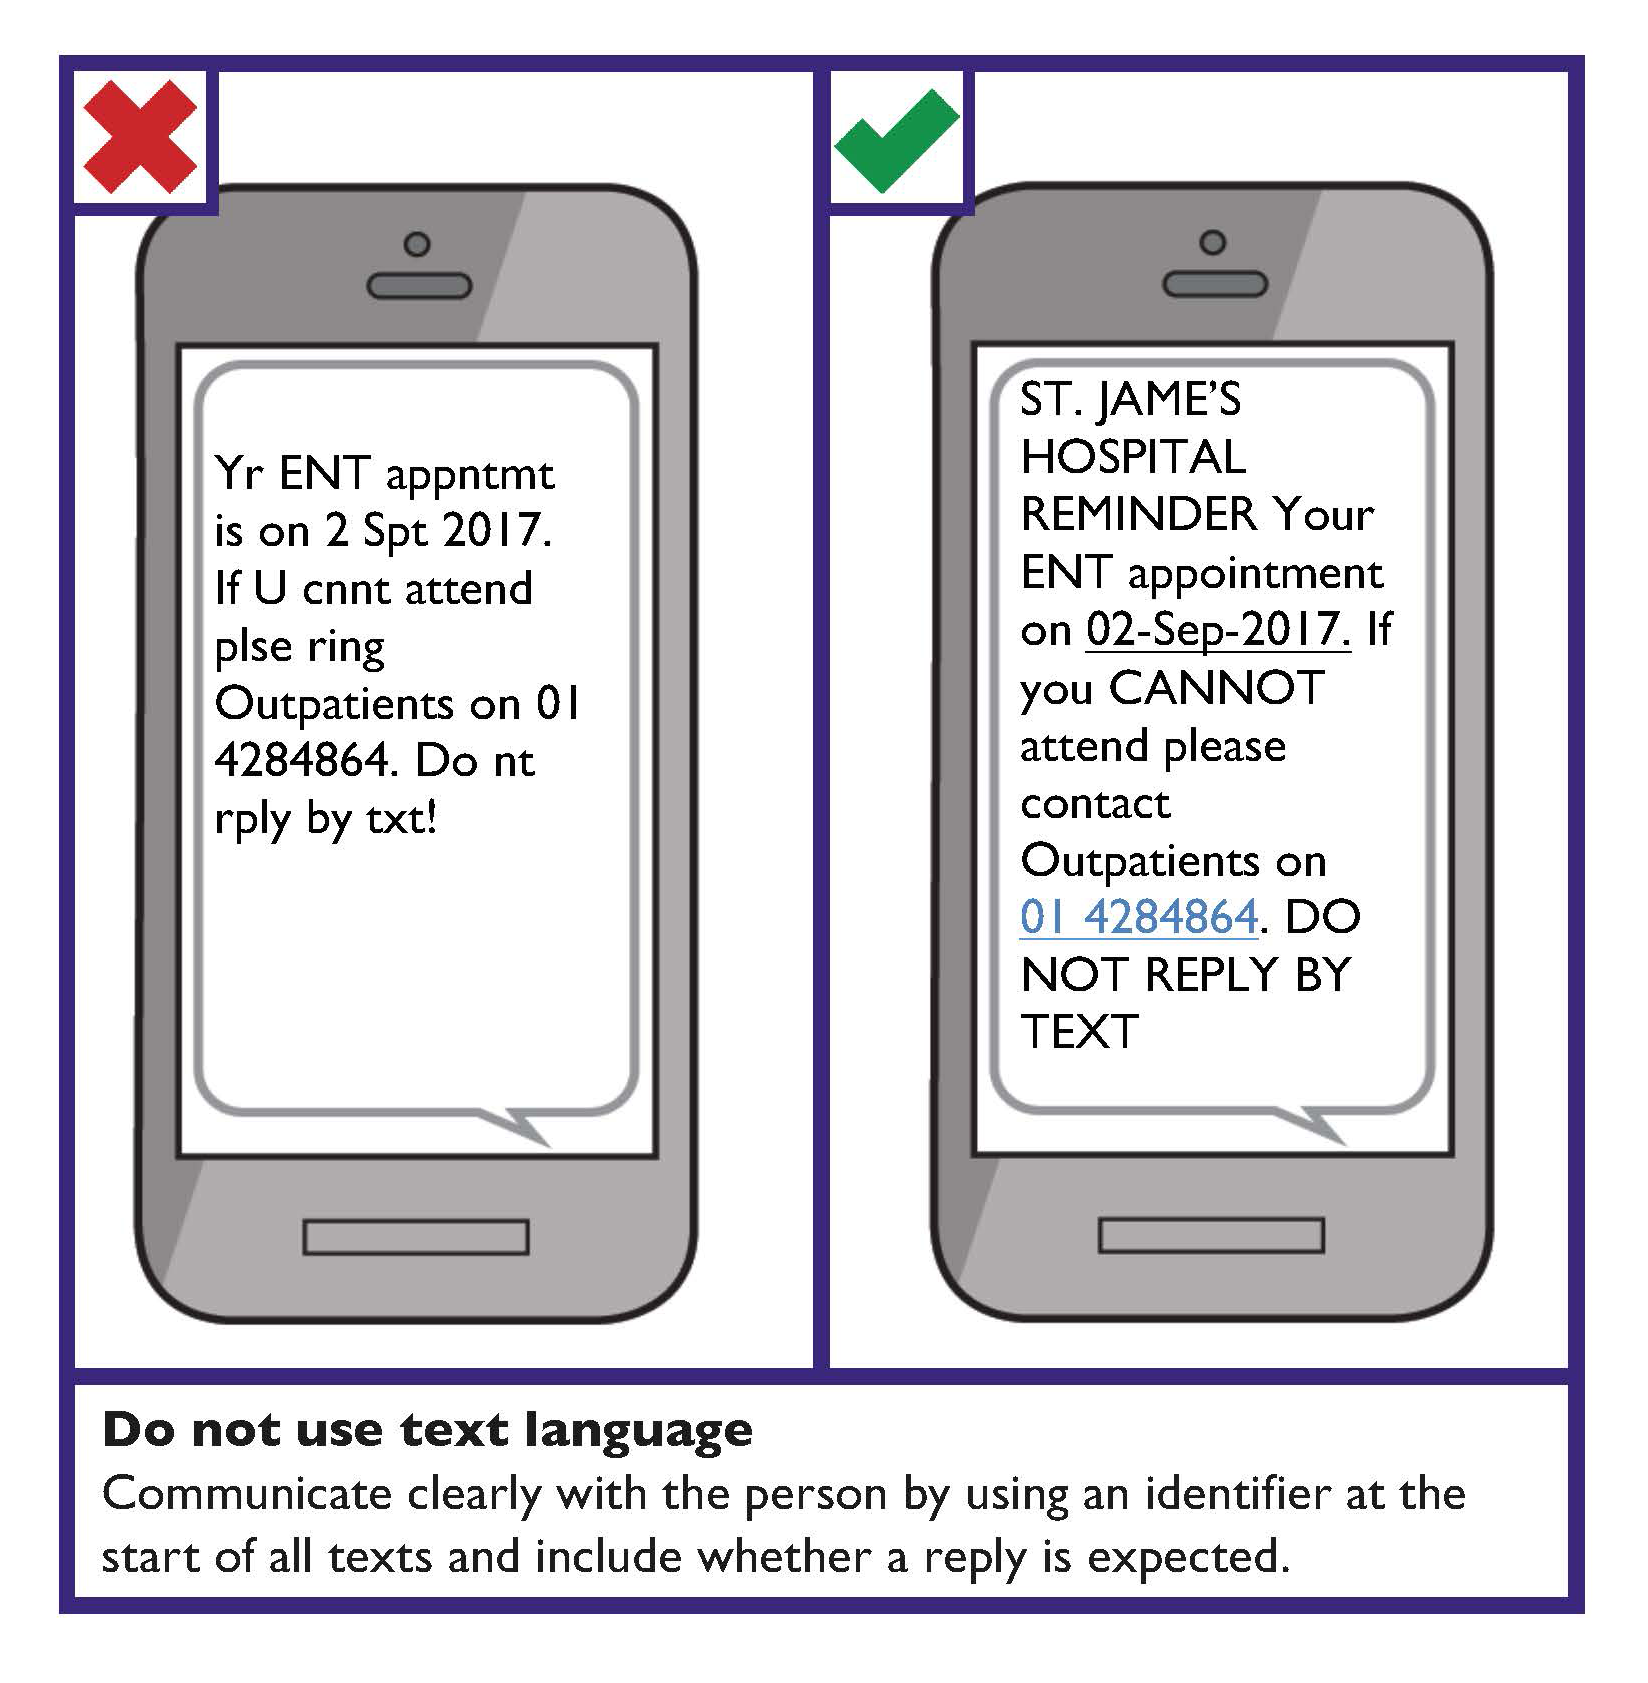 Do not use text language. Communicate clearly with the person by using an identifier at the start of all texts and include whether a reply is expected.